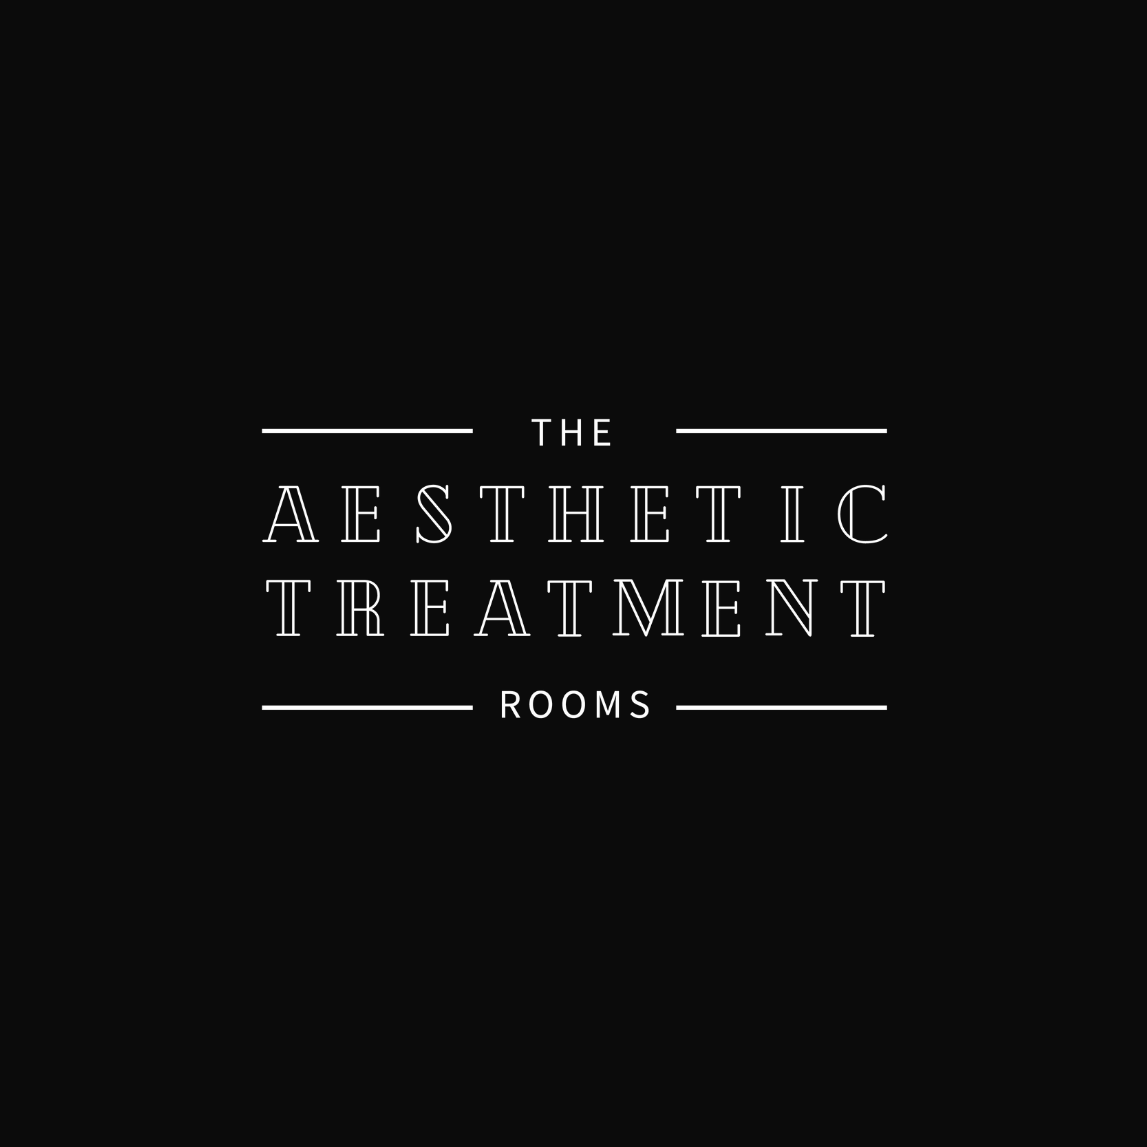 The Aesthetic Treatment Rooms